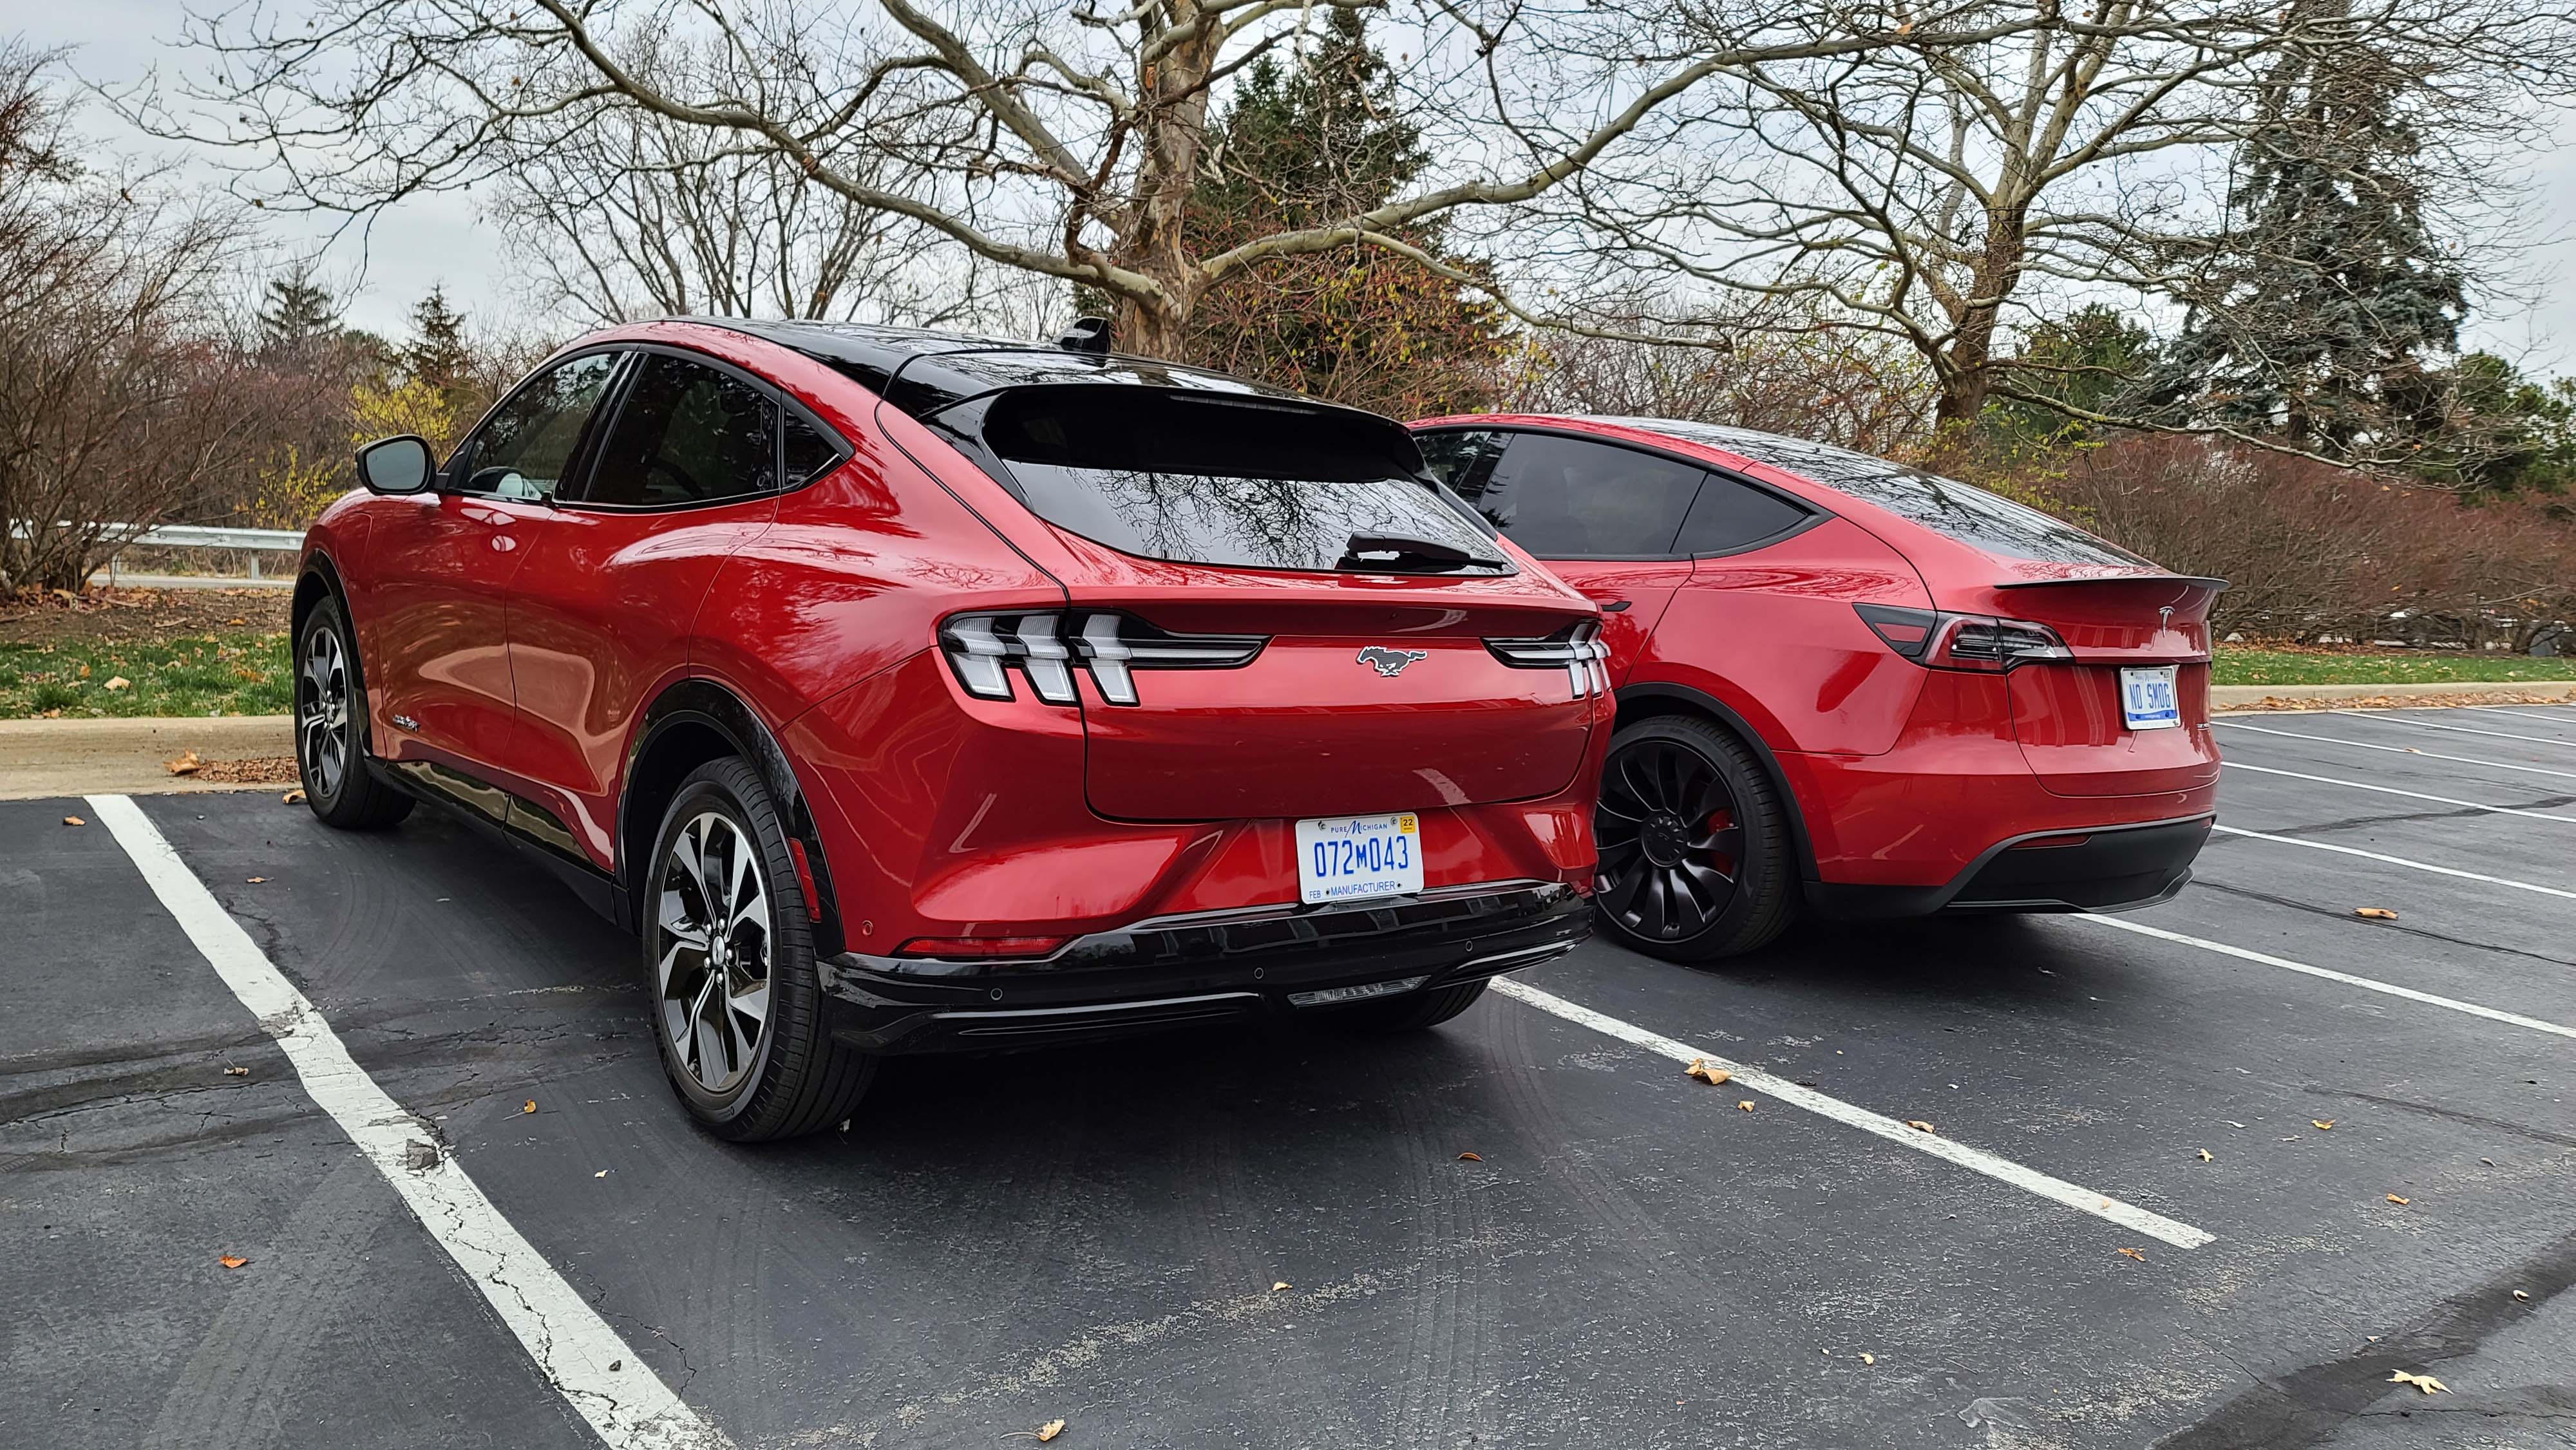 The 2021 Ford Mustang Mach-E (left) and Tesla Model Y are prime competitors in the compact SUV luxury segment.